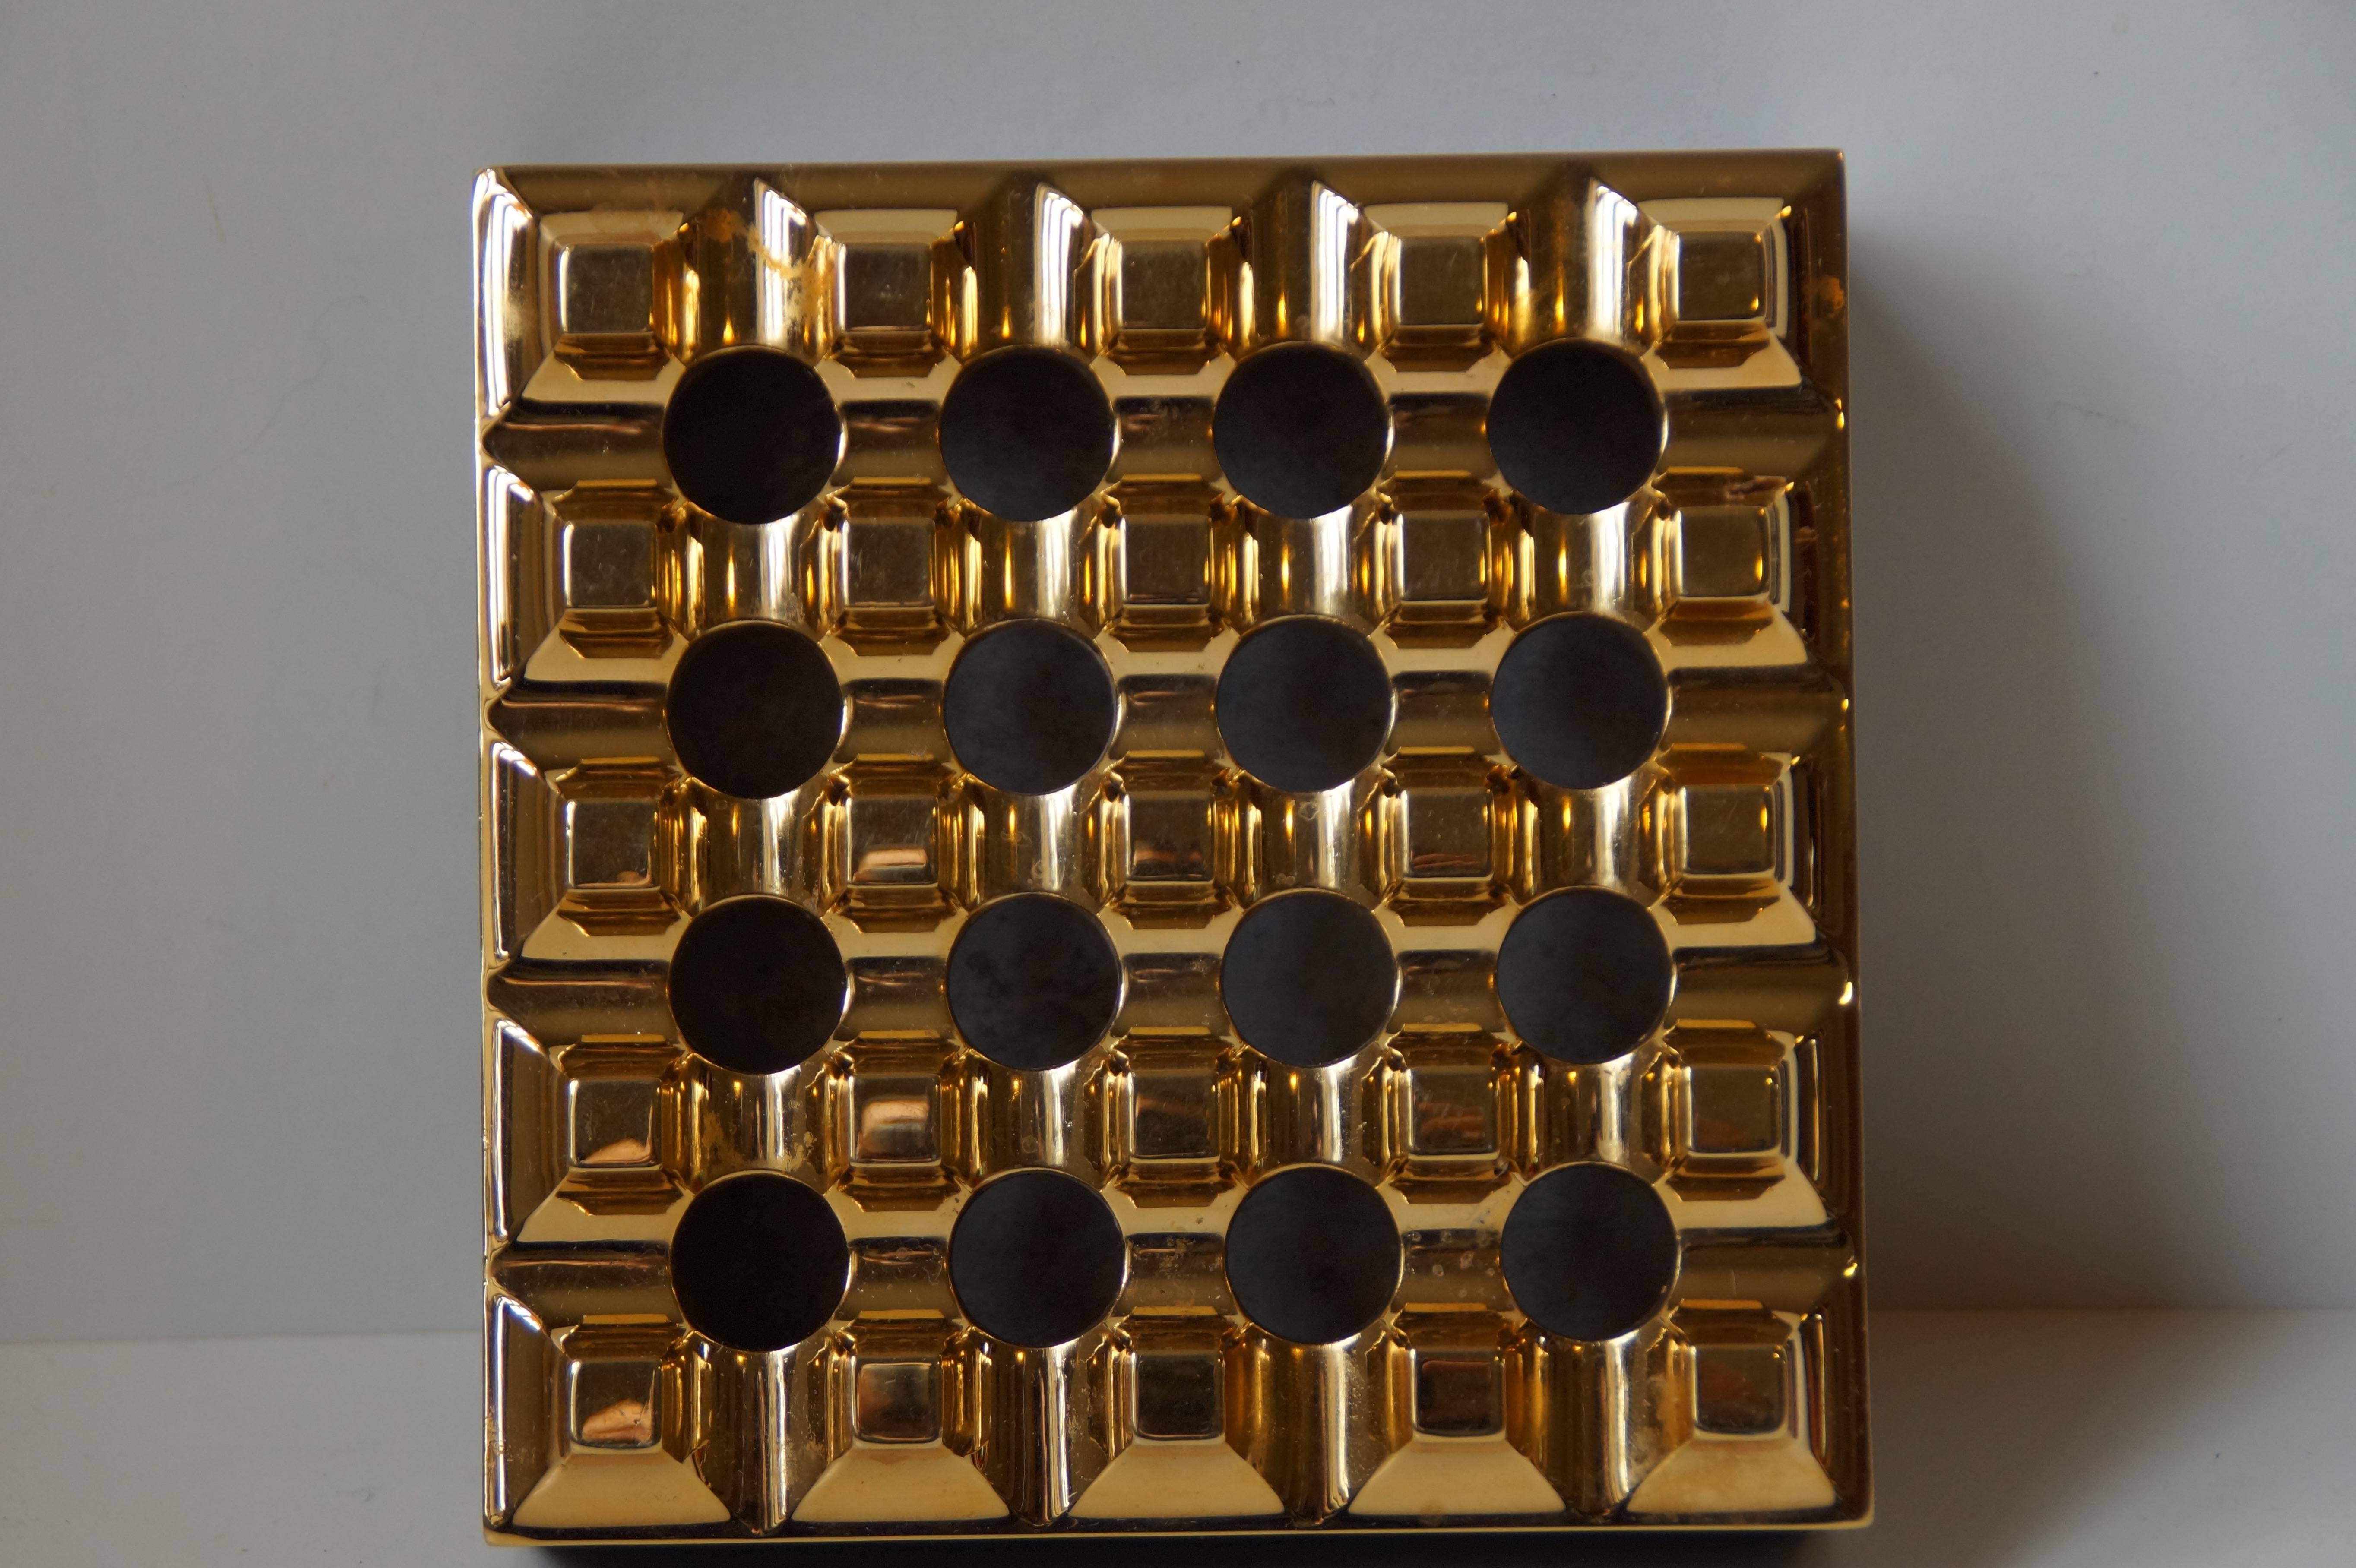 Ultra rare 23-carat gold-plated version of the Ultima 15 ashtray. Geometric design with the use of computers as drawing media to achieve perfect precision. This ashtray was ordered by Colleagues and given the President of the Danish company A/S